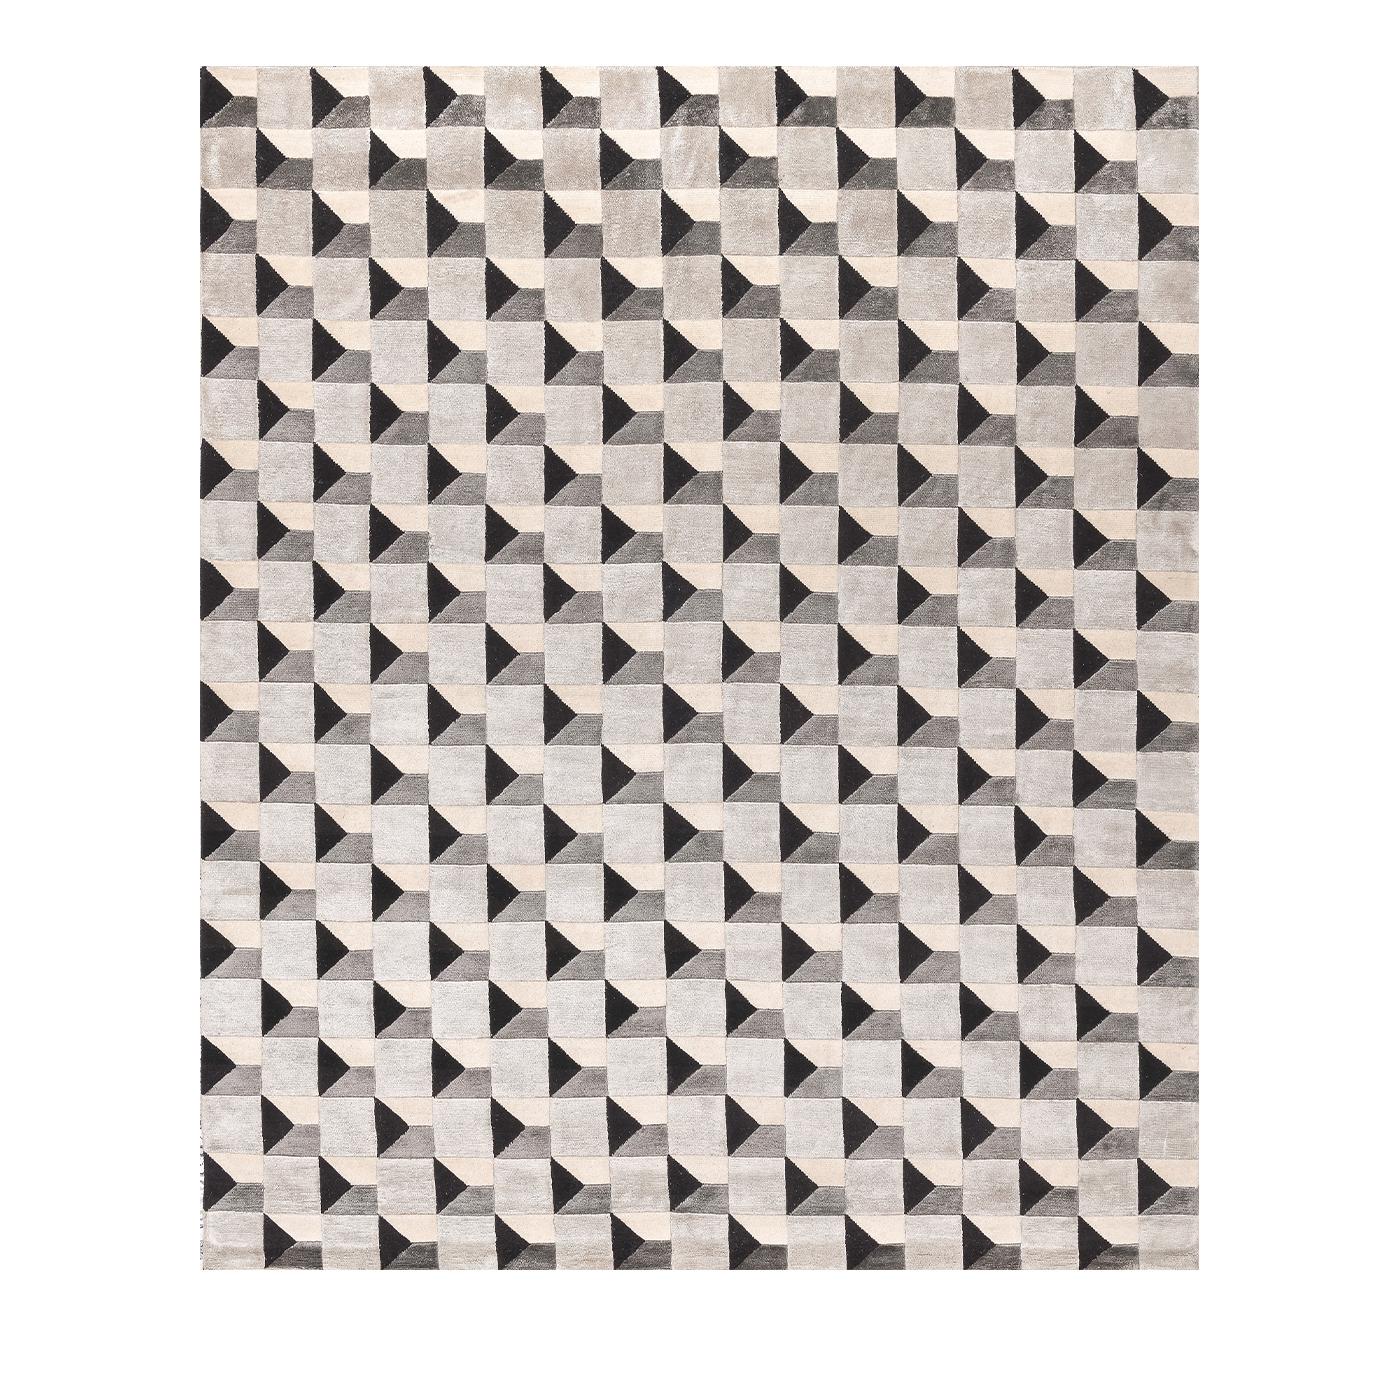 The graphic design of this Grid rug has a spectacular three dimensional effect to bring a dynamic quality to a contemporary decor. The rug is 300 x 240 cm and is composed of 50% silk and 50% Himalayan wool. These unique models are customizable in